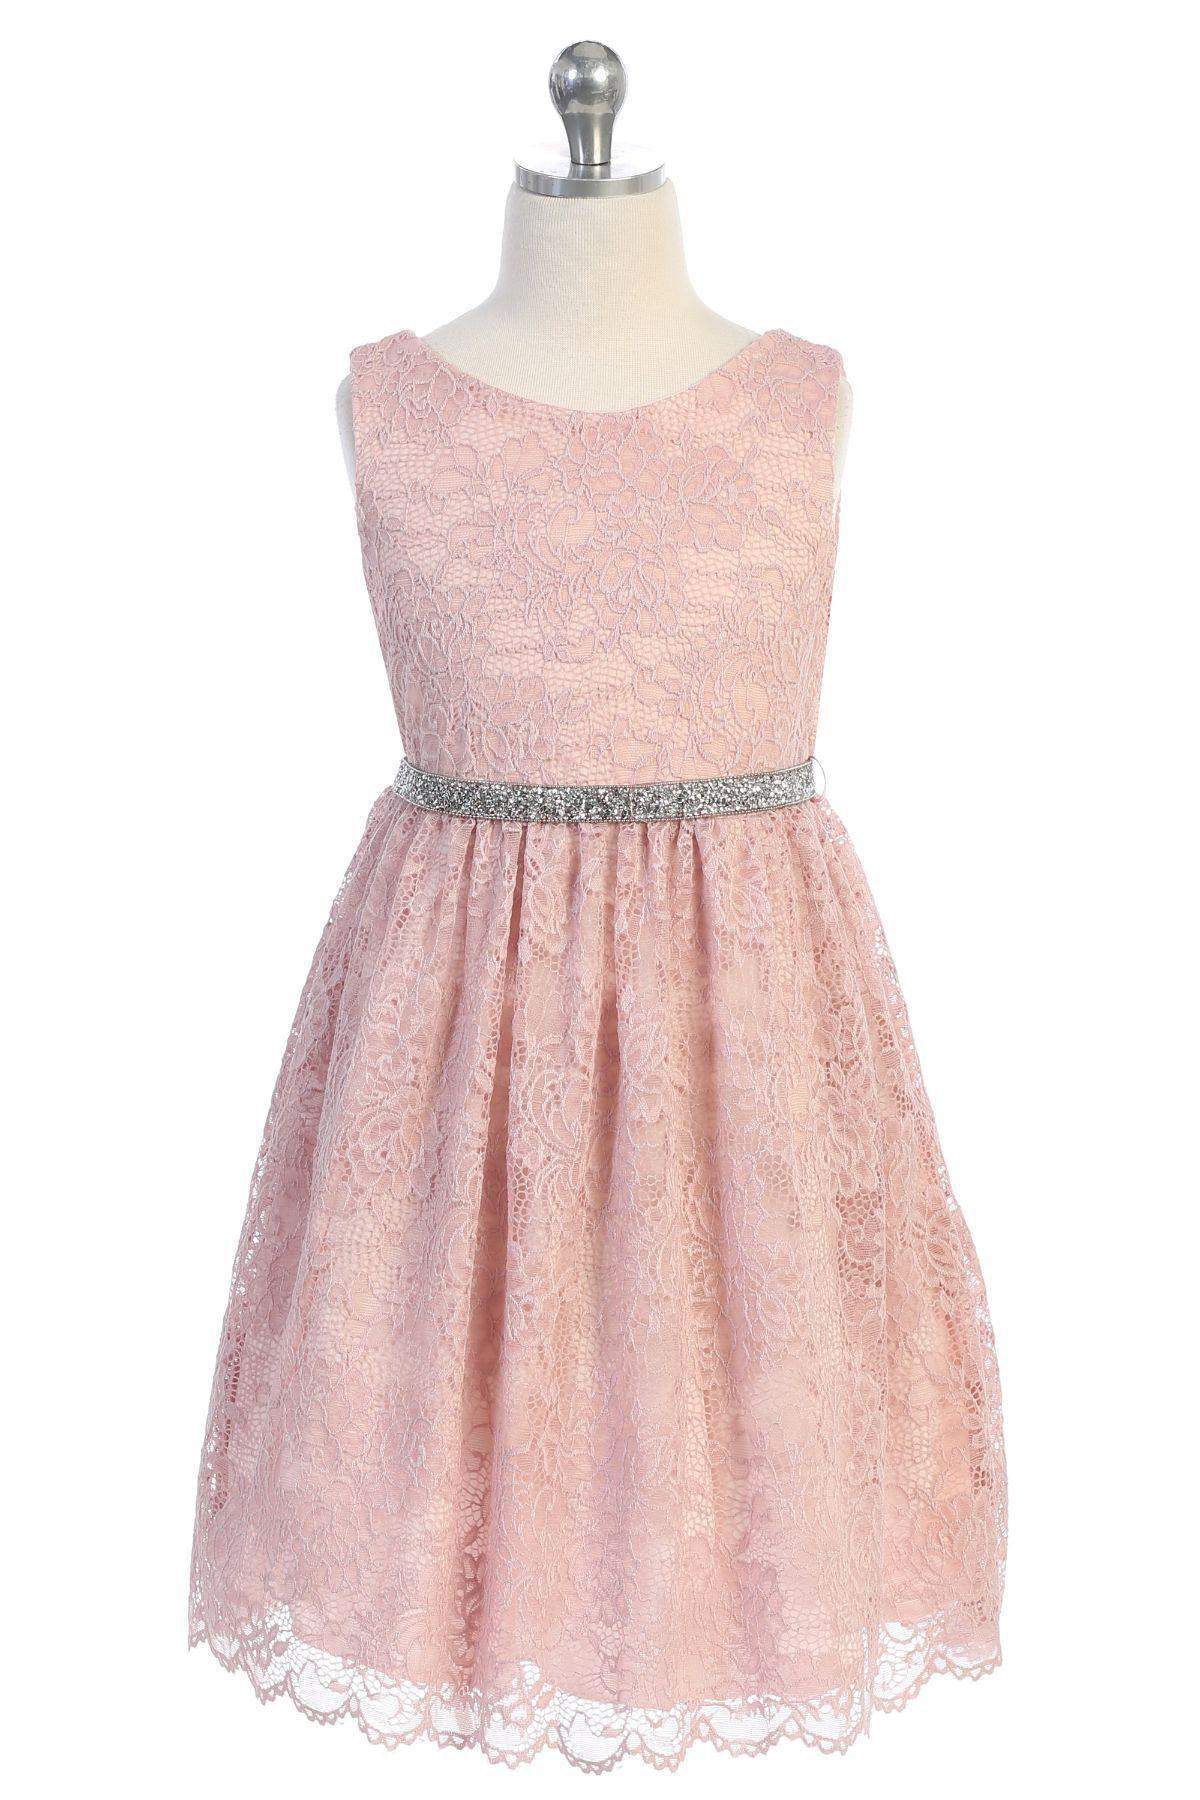 Stretch Lace Plus Size Girl Dress-Kid's Dream-color_Blush Pink,fabric_Lace,girl-dress,length_Knee Length,meta-related-collection-shop-the-outfit-girls,Pink-collection,size_14.5,size_16.5,size_18.5,size_20.5